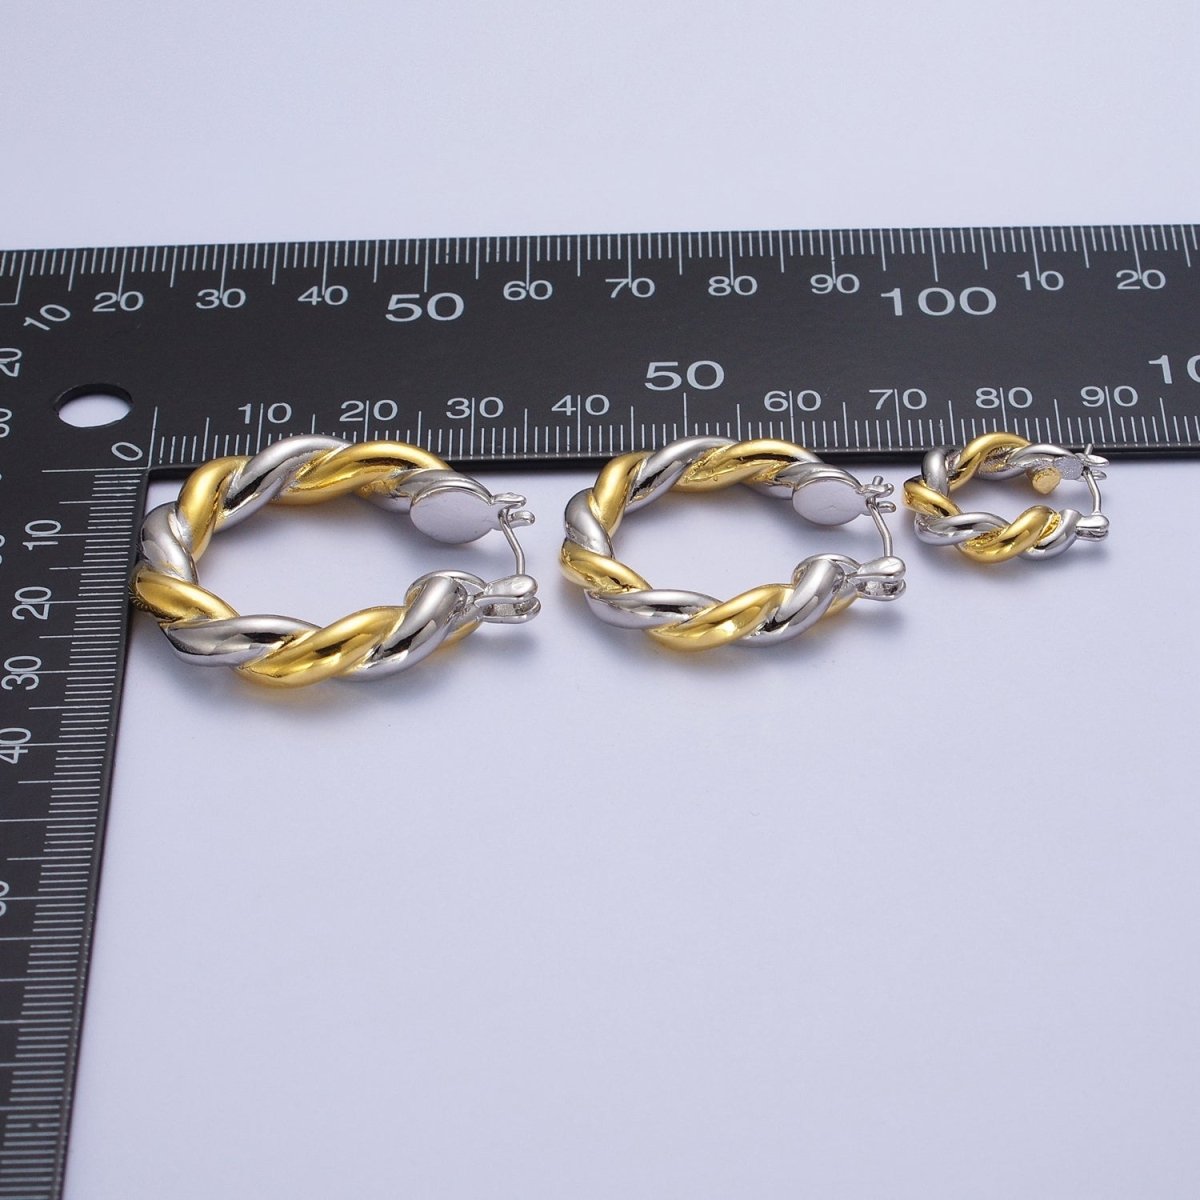 Mixed Metal Silver & Gold Twisted Chunky Two Tone Croissant Hoops Statement Earrings Gift For Her | AE-1084 AE-1085 AE-1086 - DLUXCA